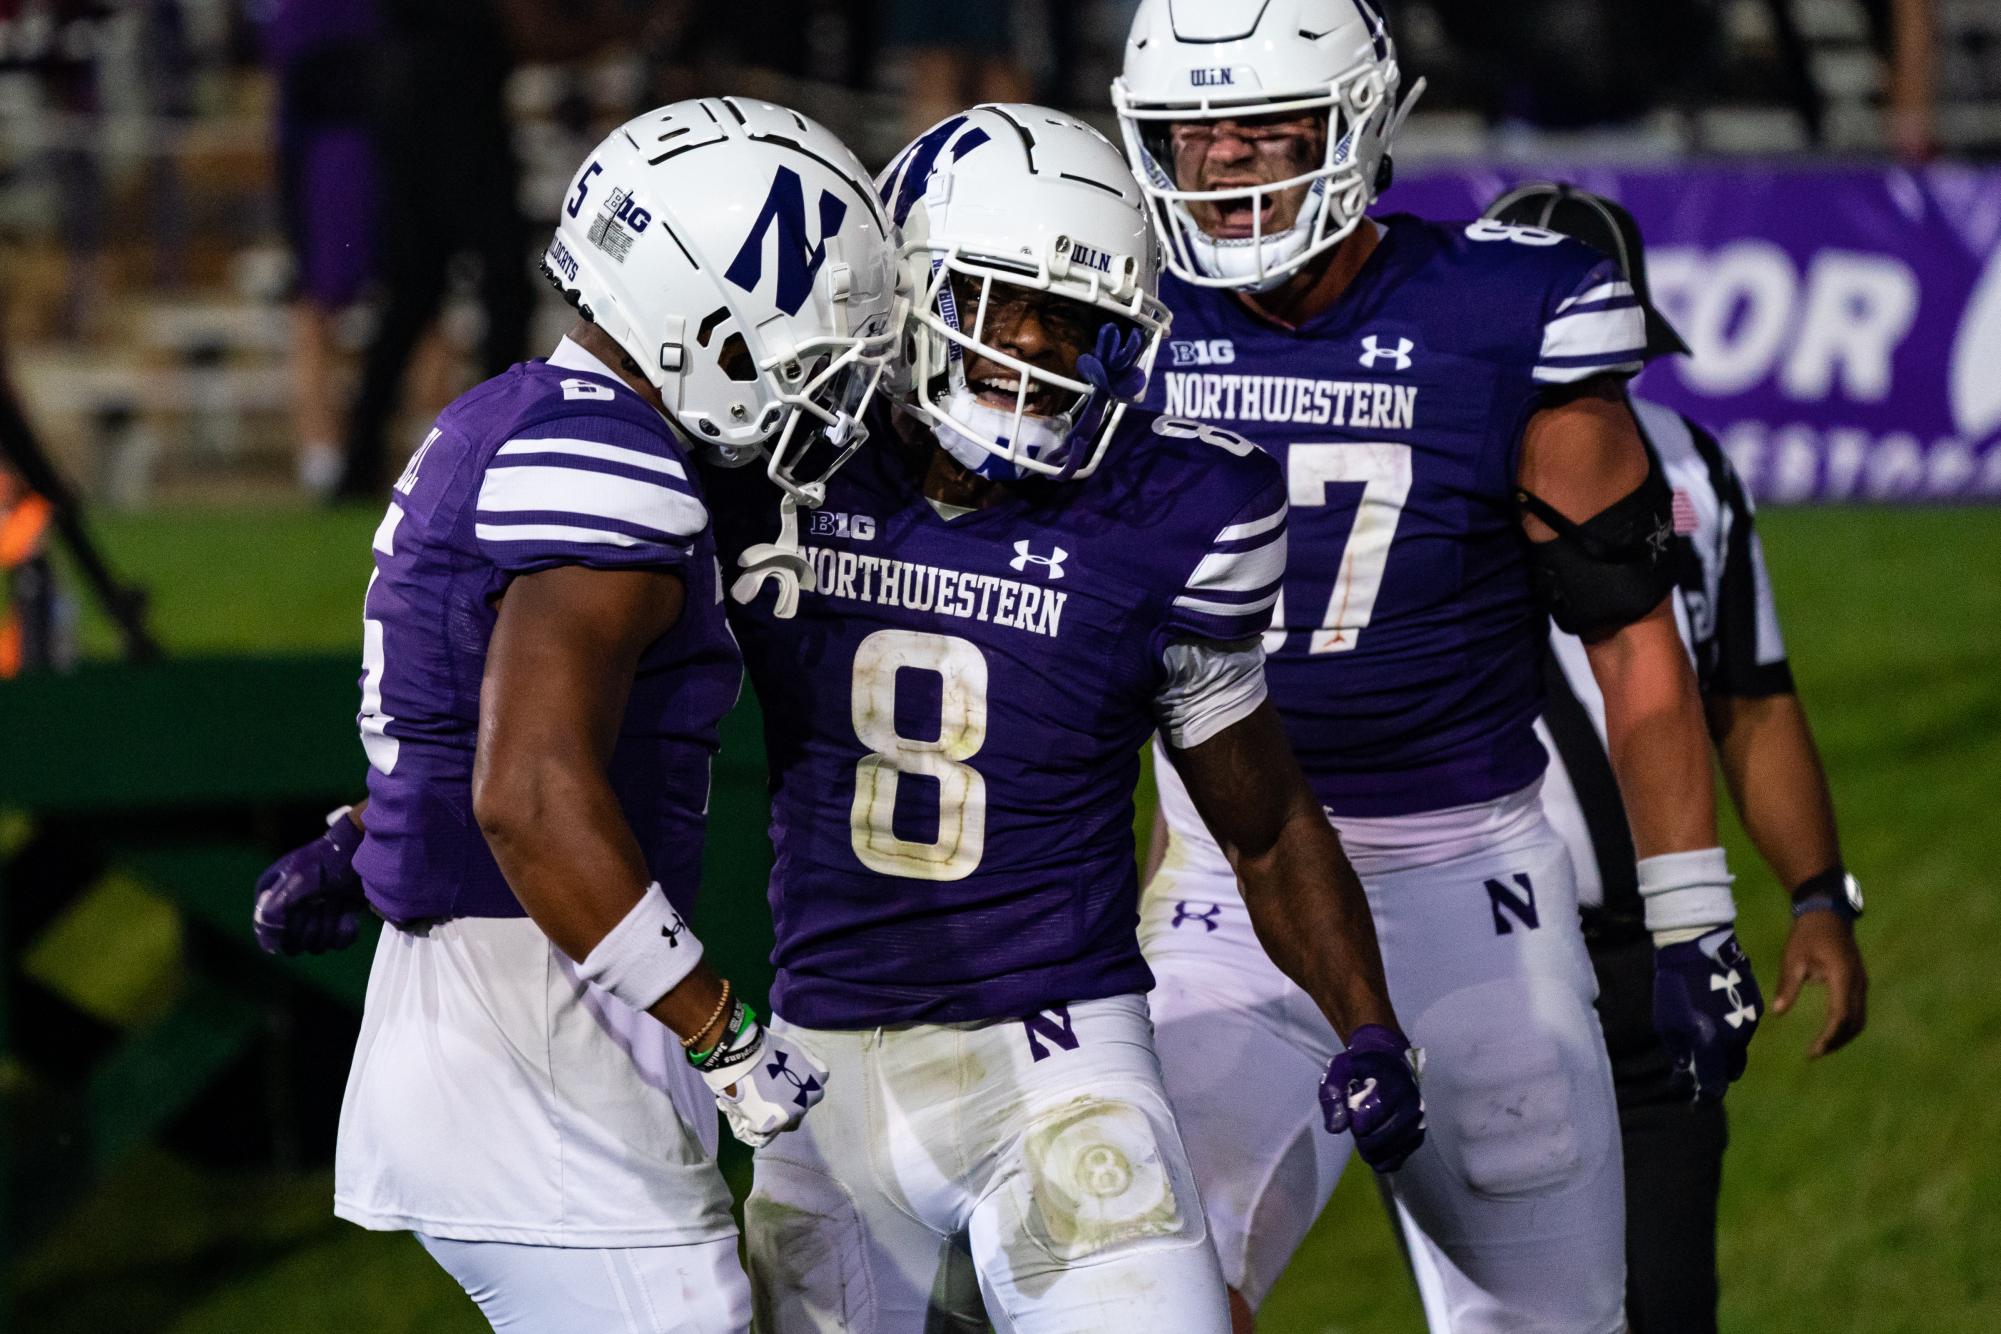 A.J. Henning celebrates with his teammates after a big play. NU’s comeback victory over Minnesota showed its ability to fight back, regardless of the situation and circumstances.